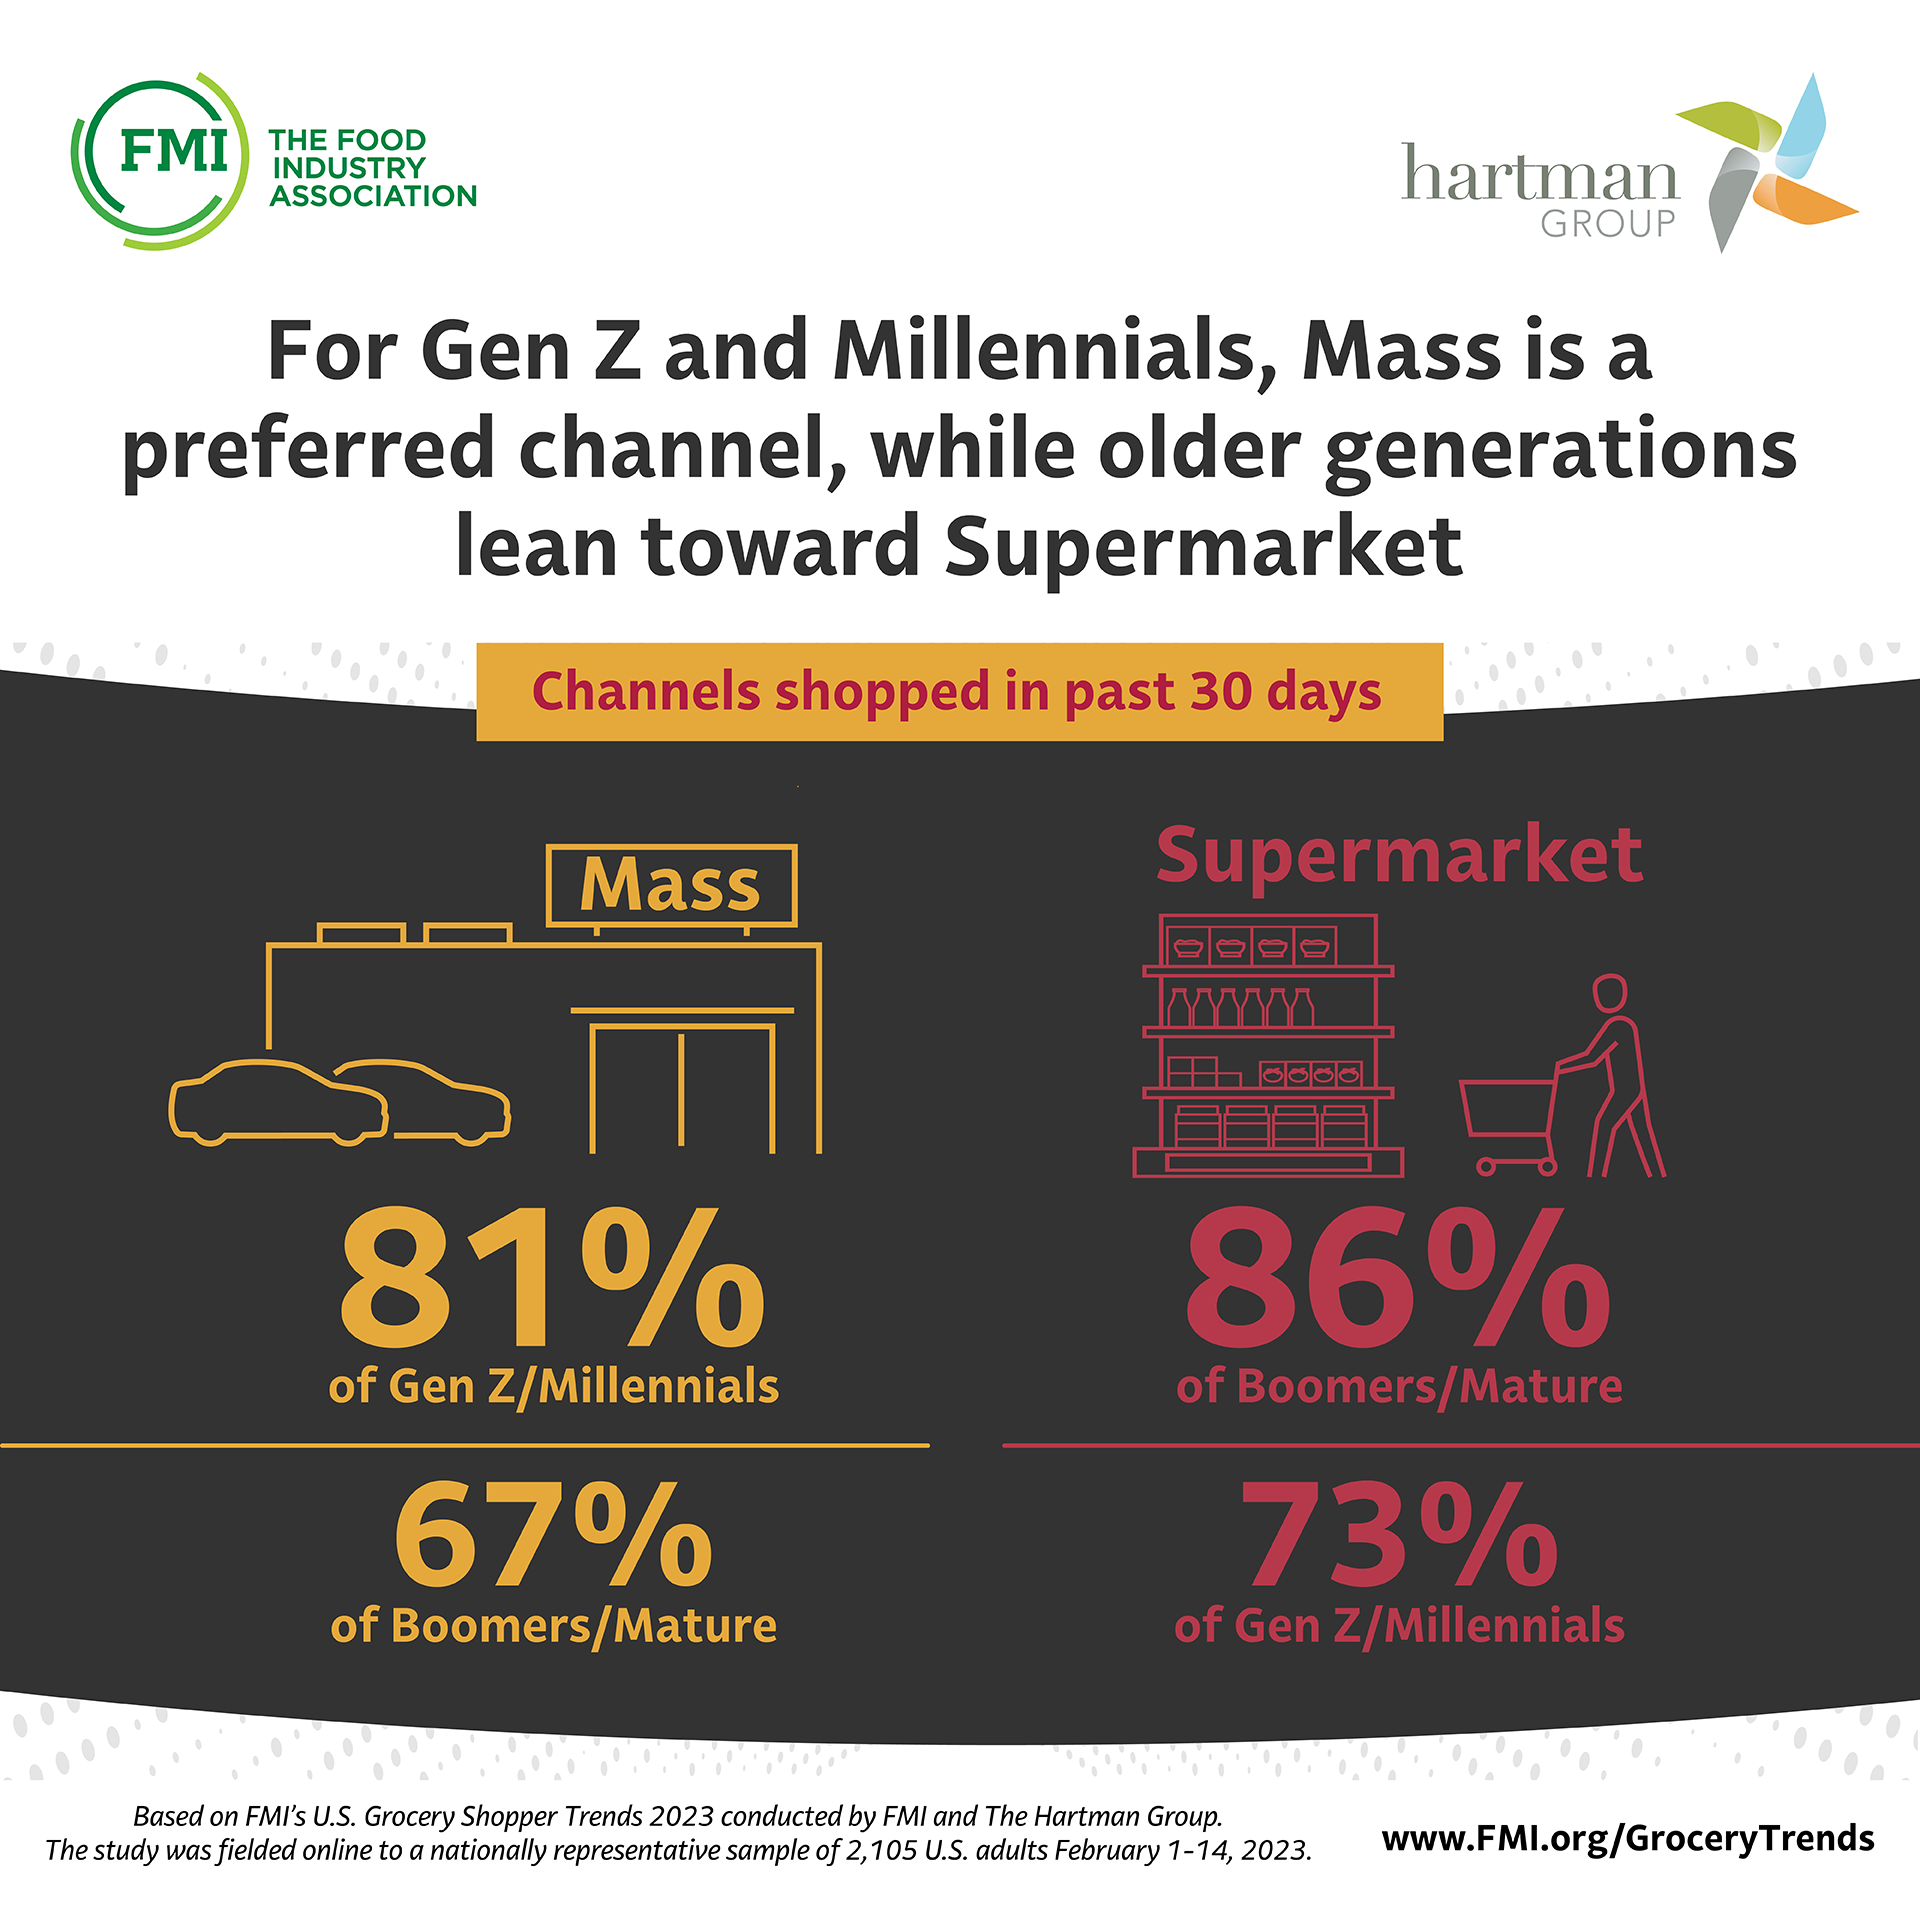 Millennials vs Gen Z: 4 Differences in What They Care About